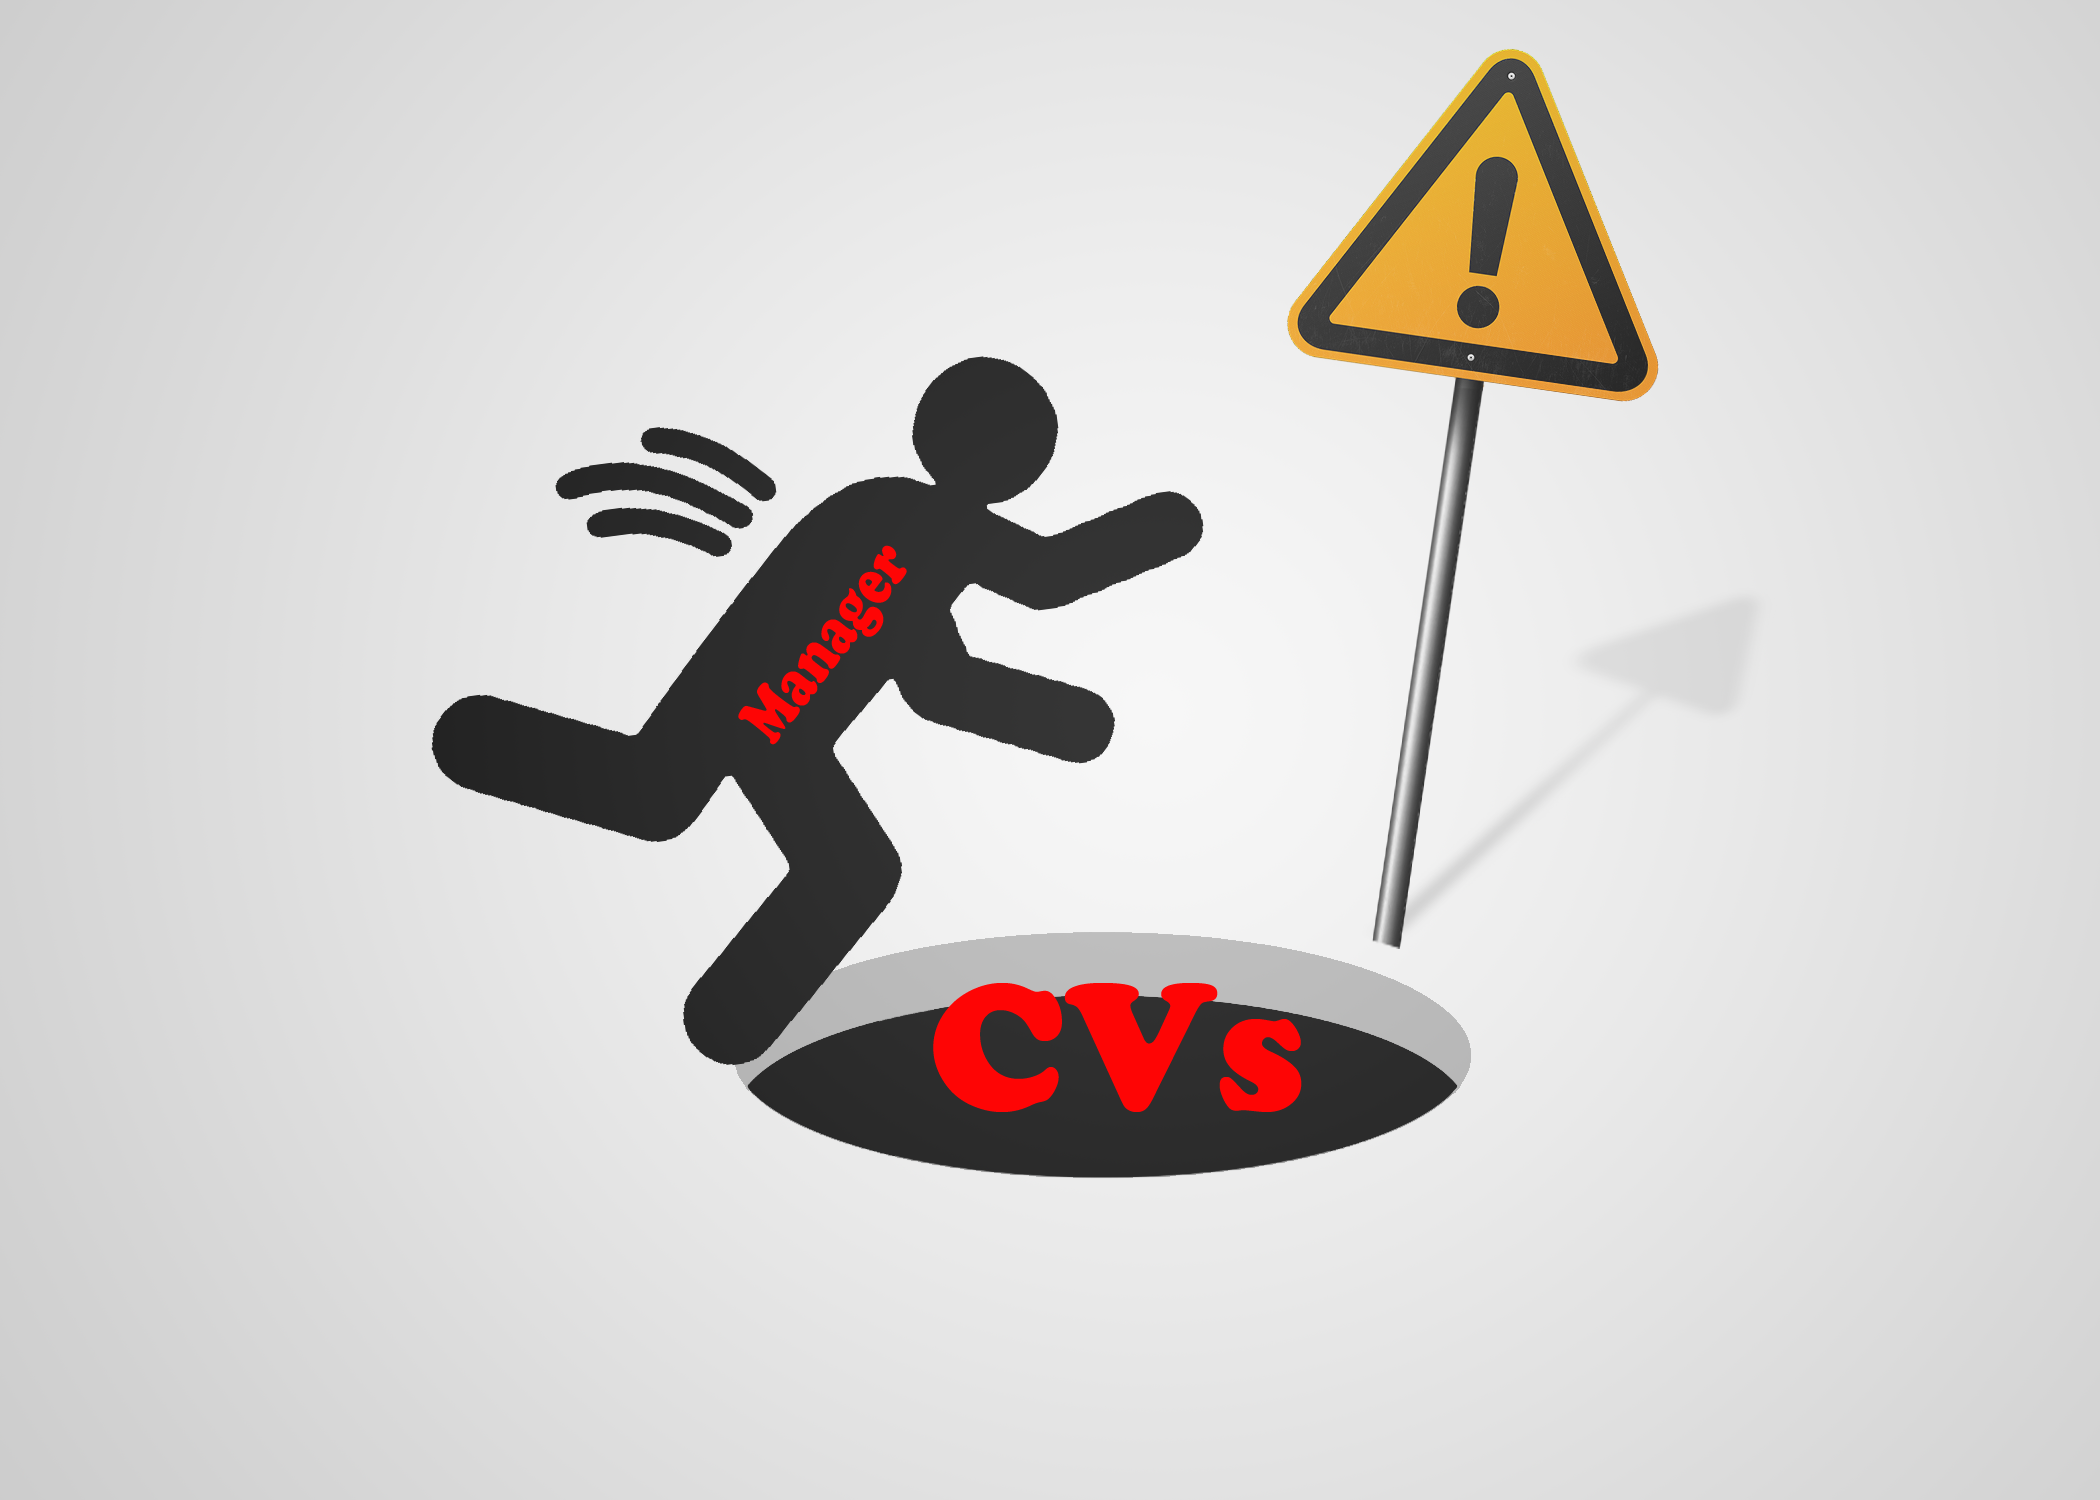 “The Pitfalls of Relying Solely on CVs: Lessons from 25 Years of Hiring Experience”